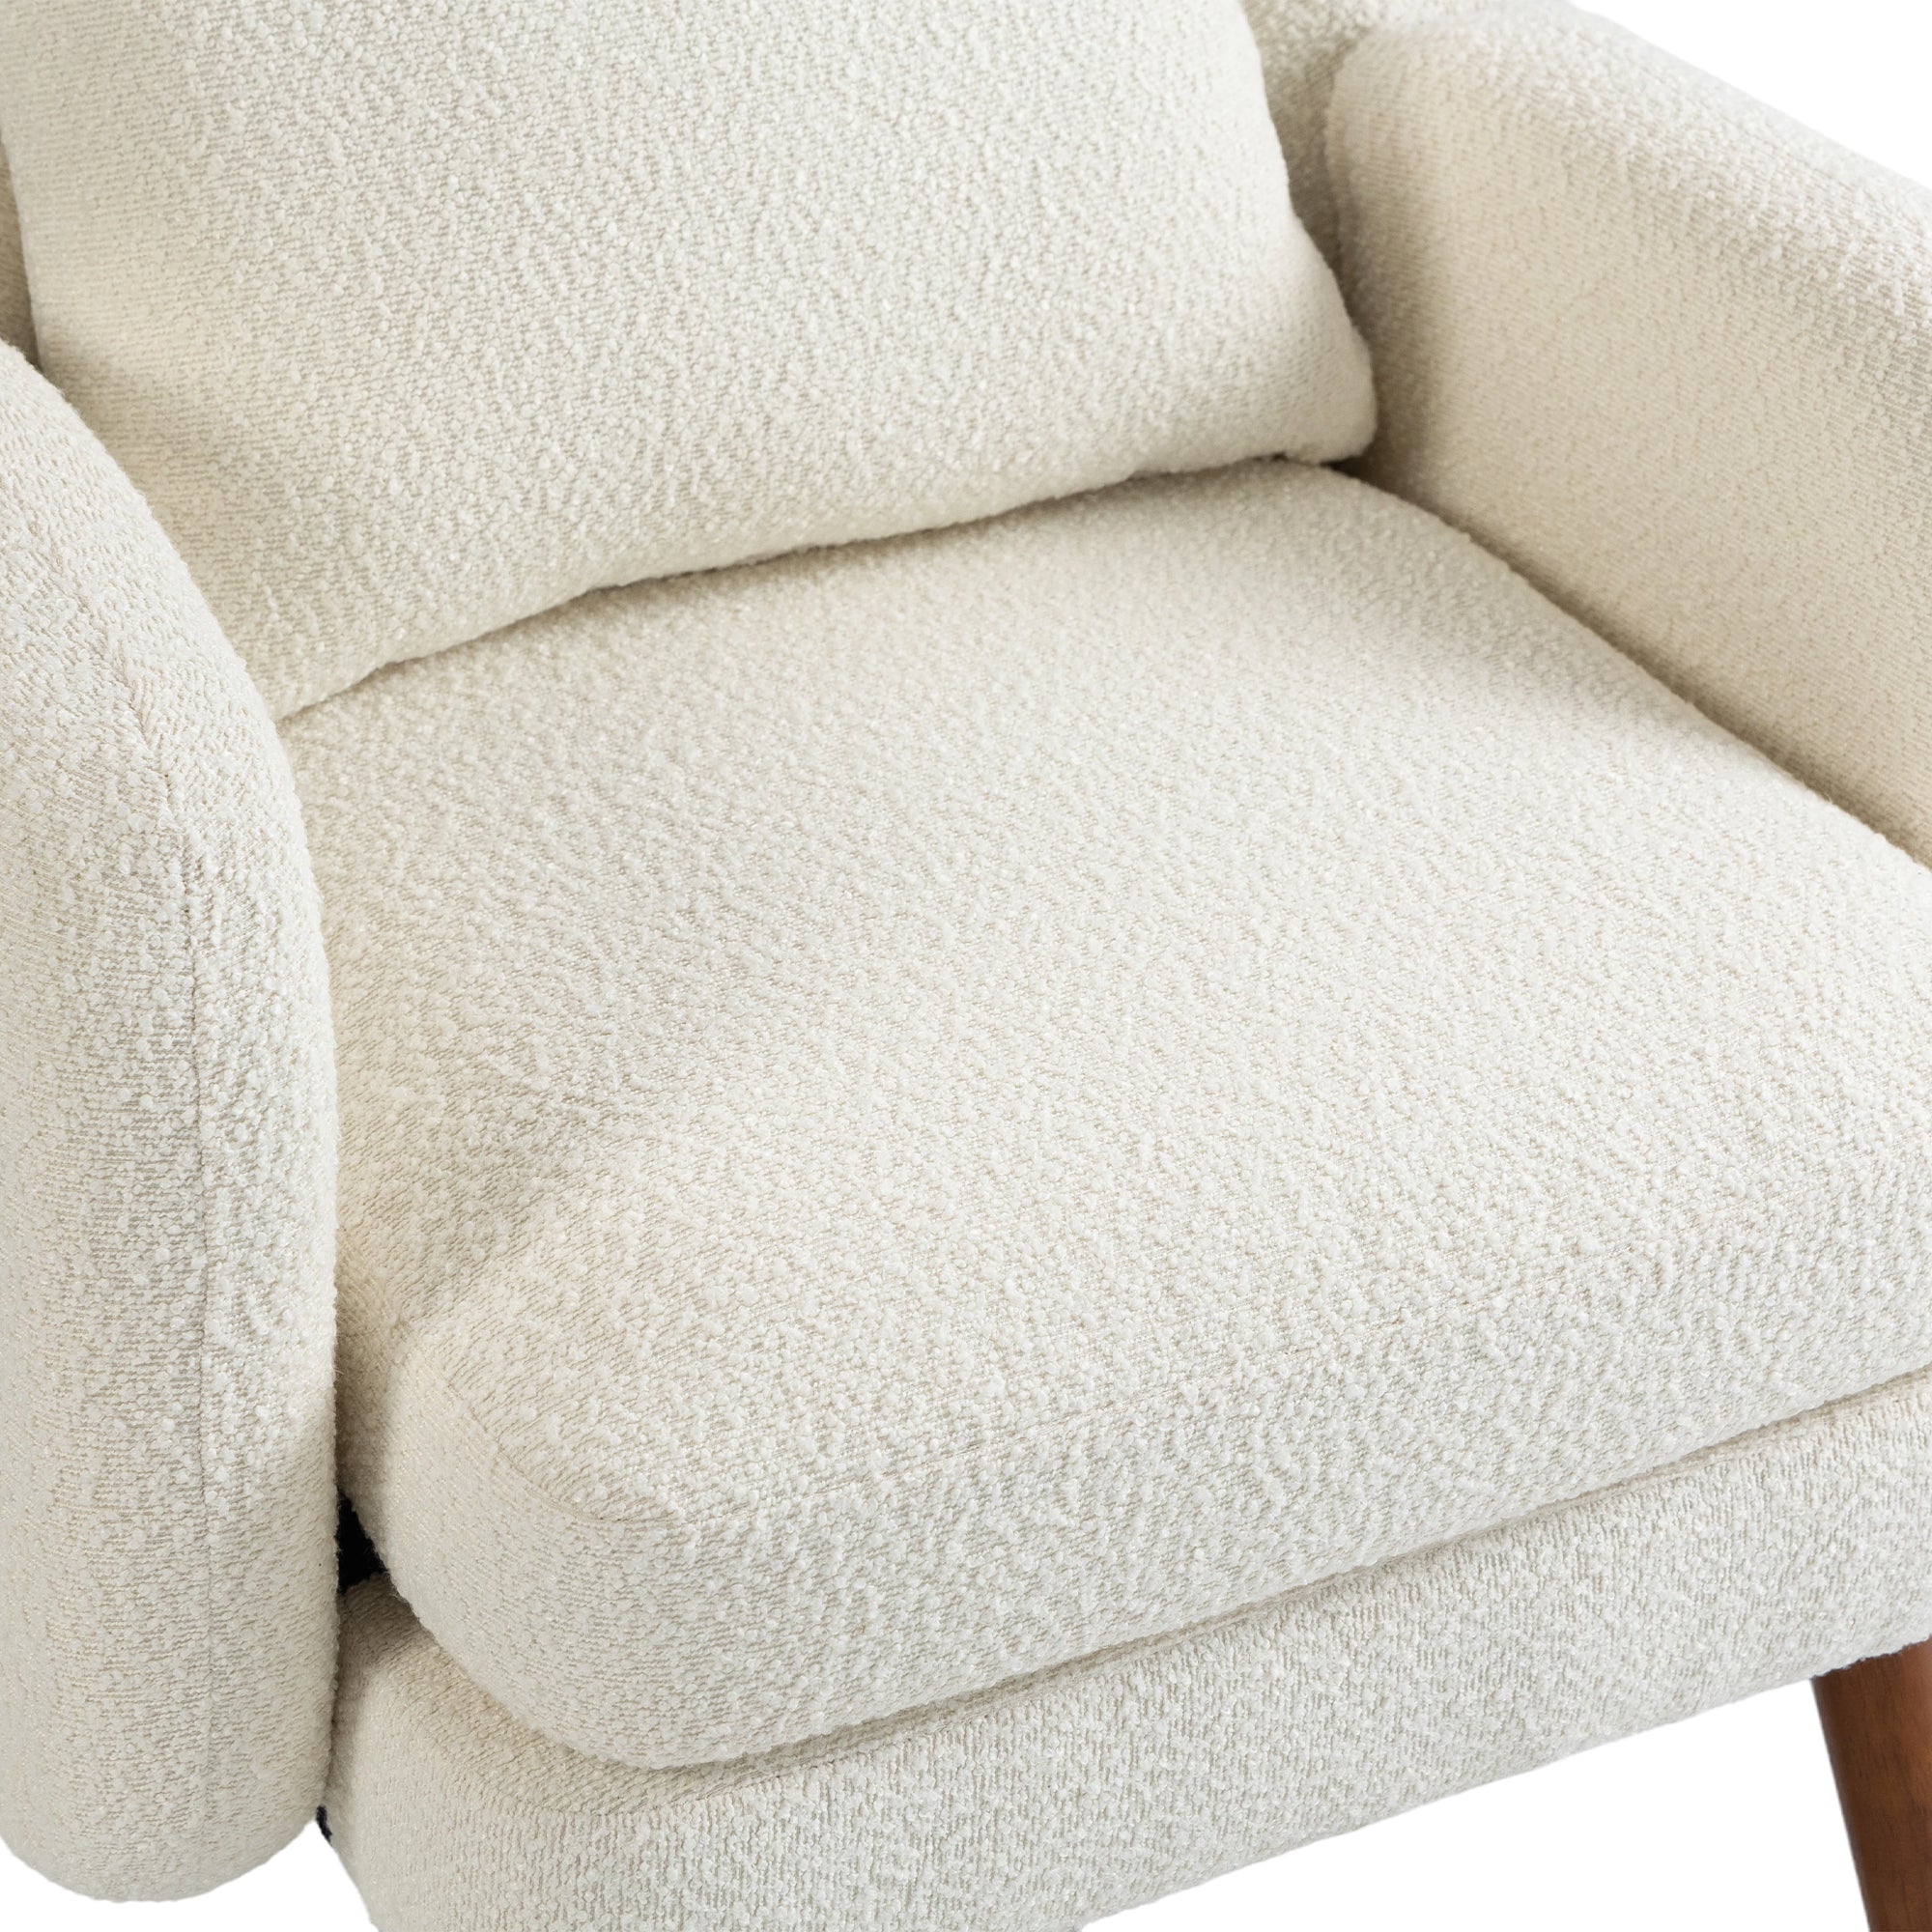 COOLMORE Wood Frame Armchair, Modern Accent Chair beige-boucle